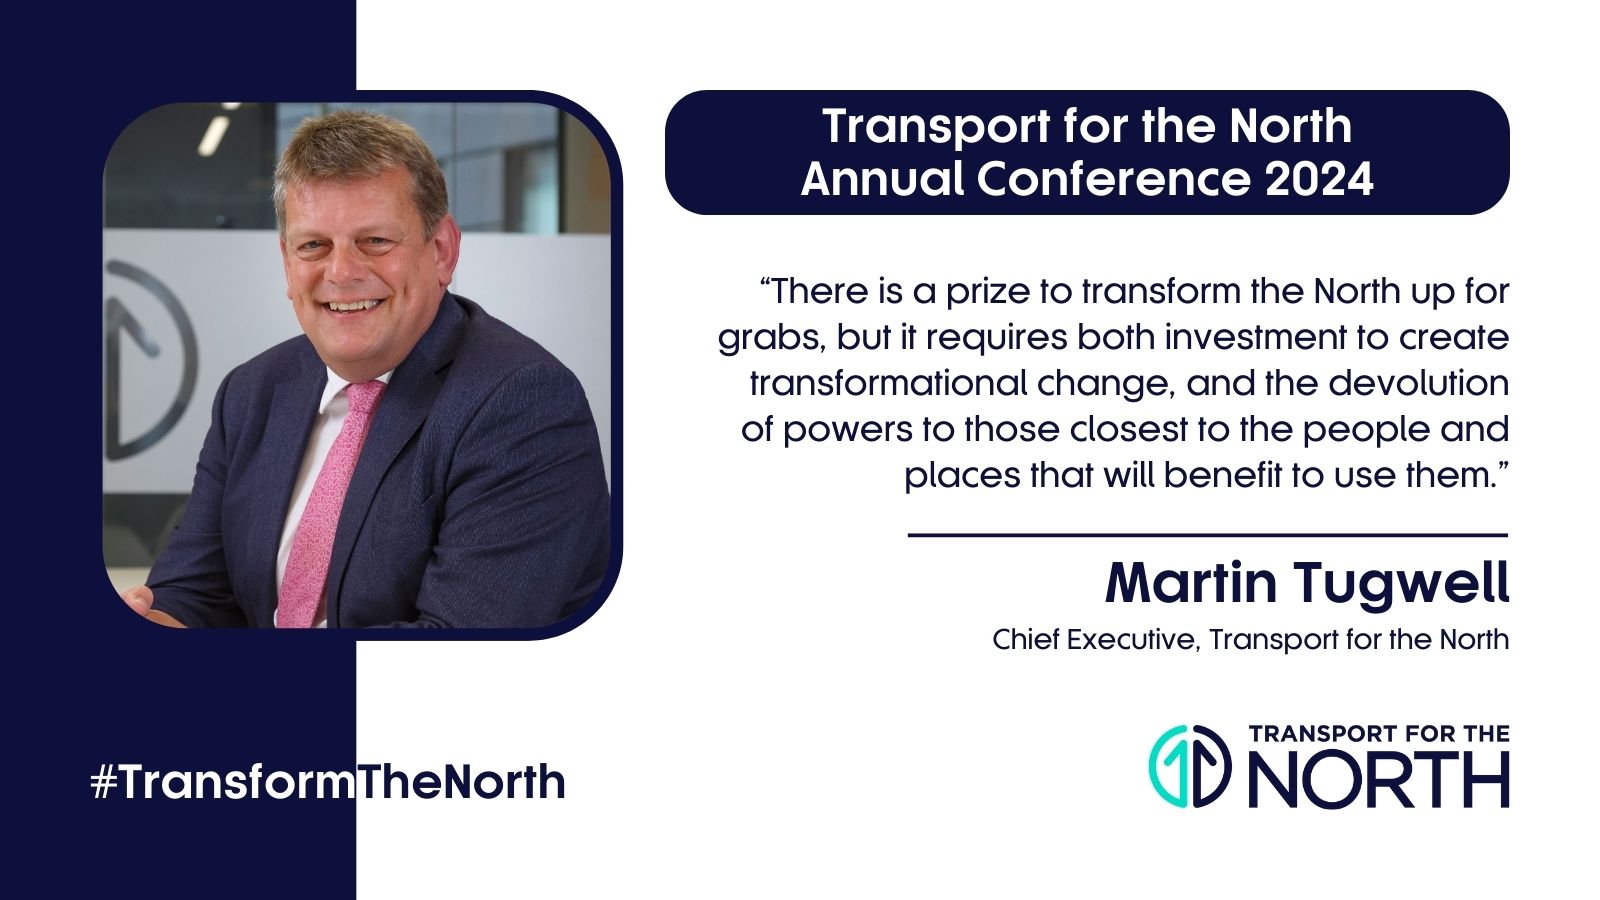 Martin Tugwell comments on the need to Transform the North